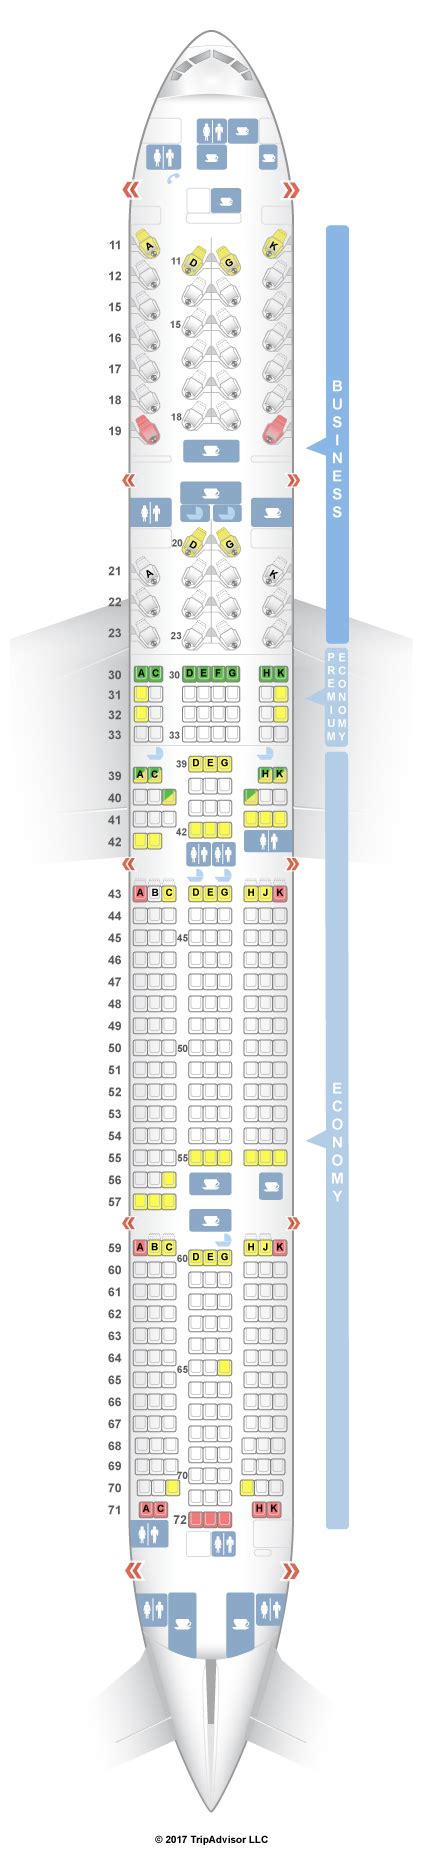 cathay boeing 777-300er seat map